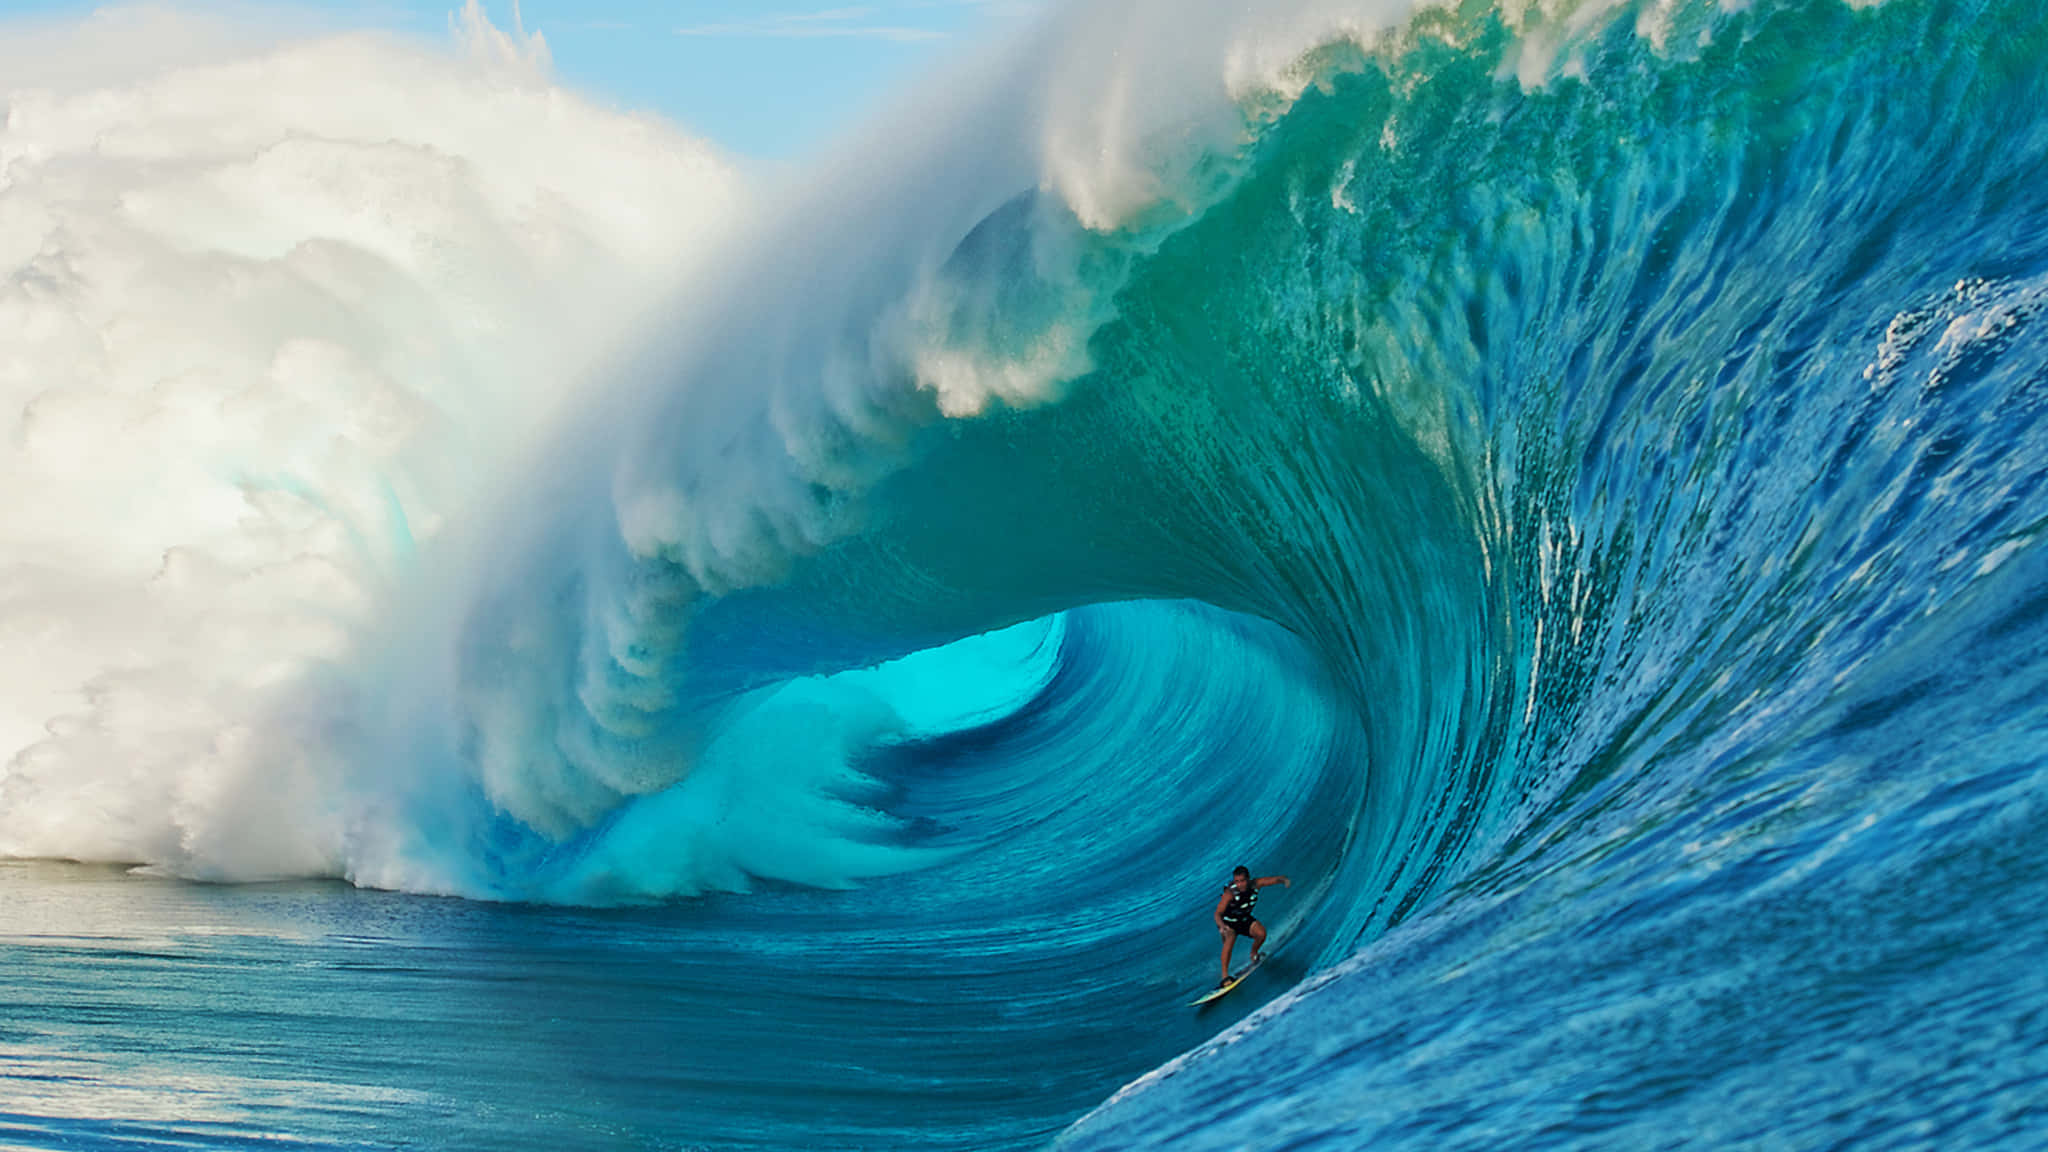 The beauty of a wave – mesmerizing and powerful